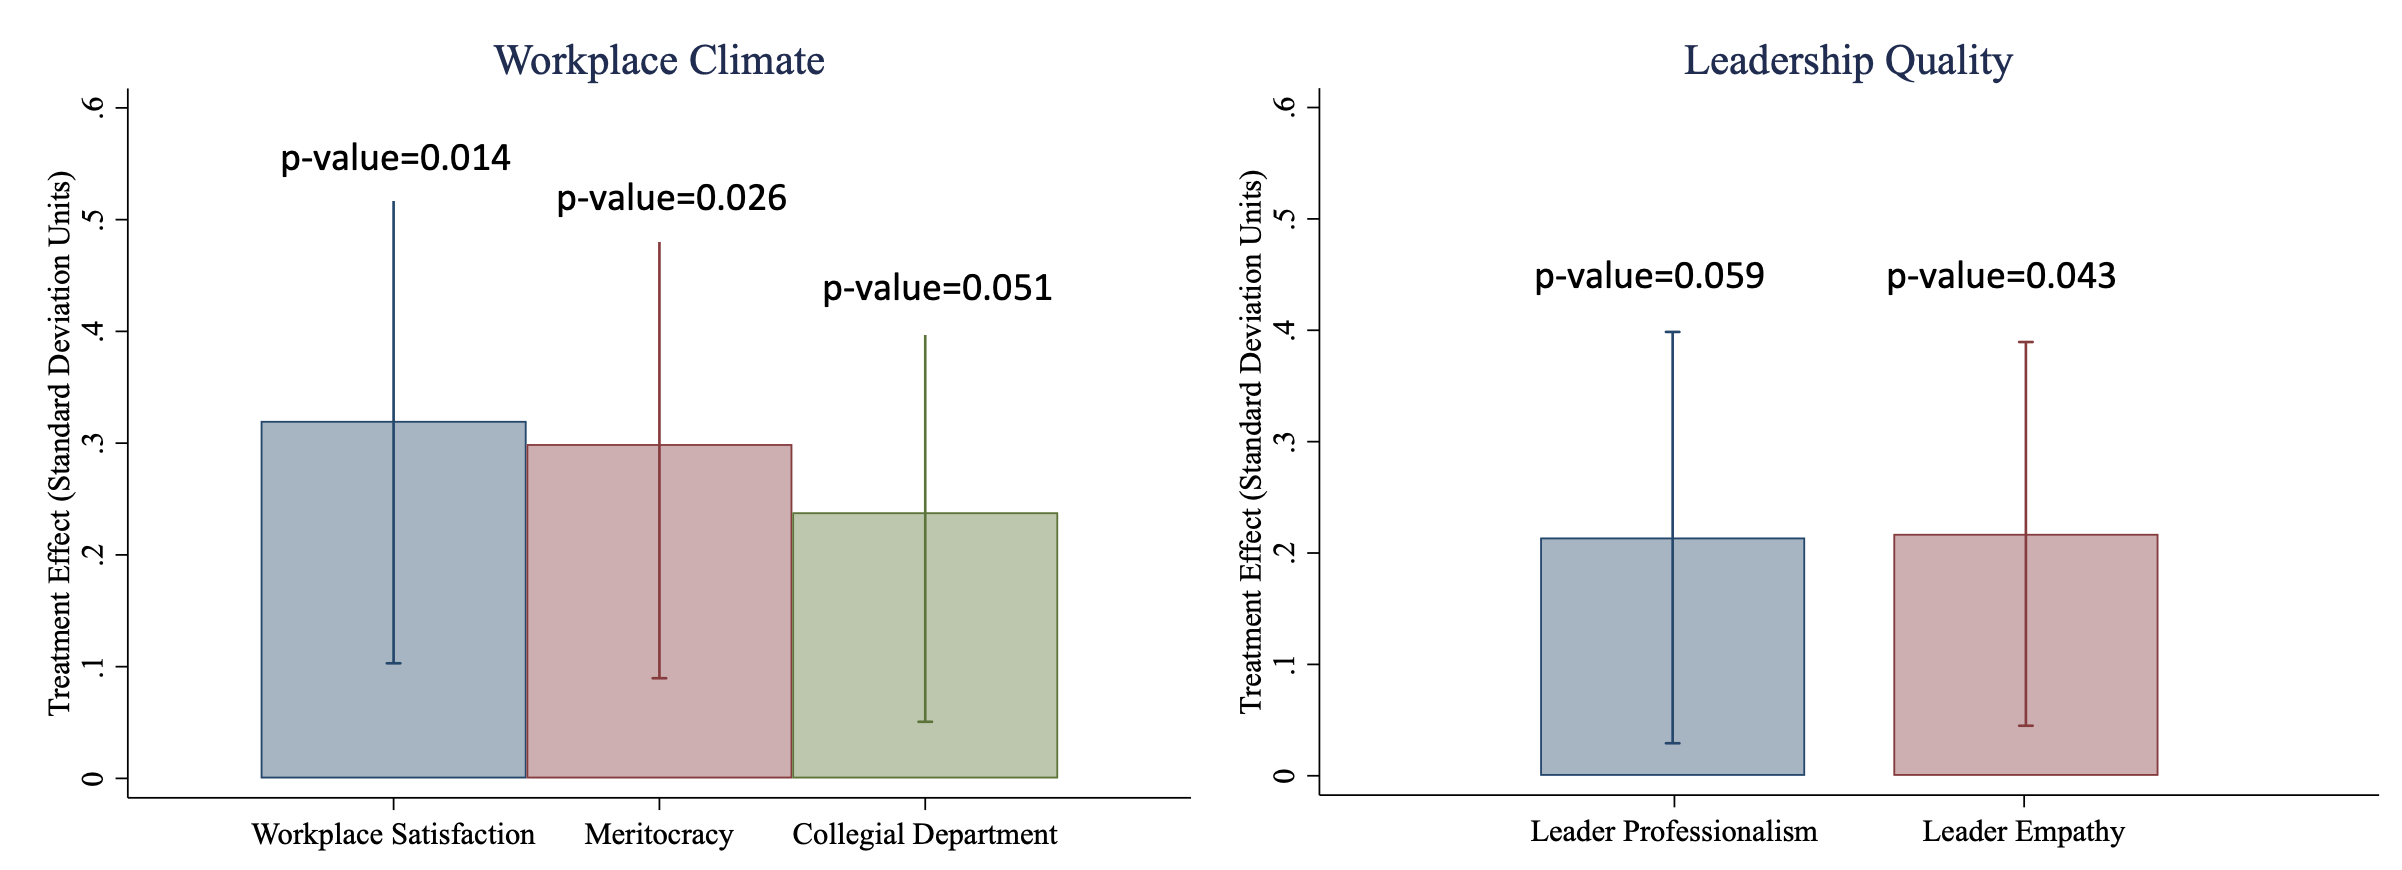 Figure 3 Treatment effects on perceived workplace climate and leadership quality